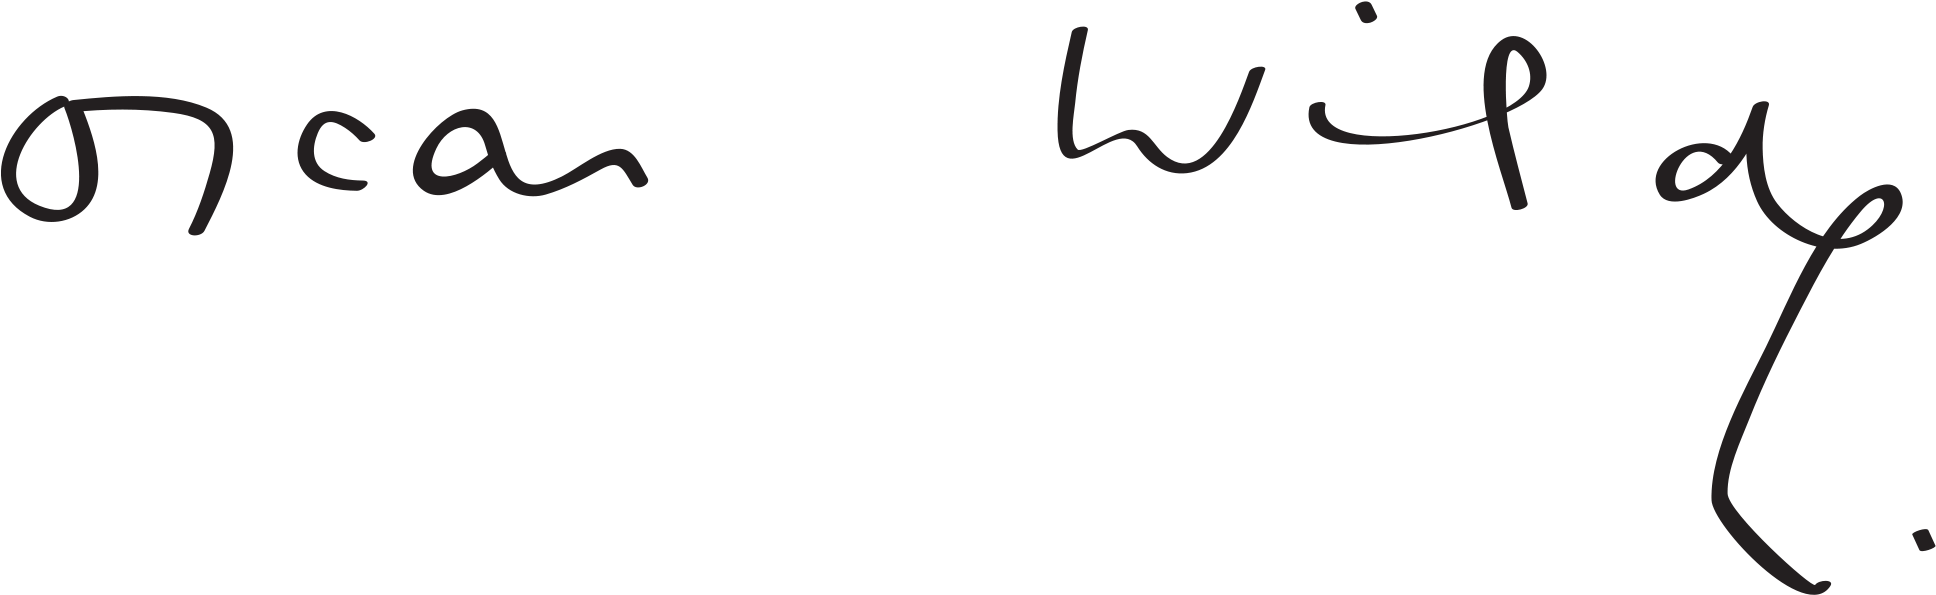 Download Open - Oscar Wilde Signature Tattoo PNG Image with No Backgroud - ...